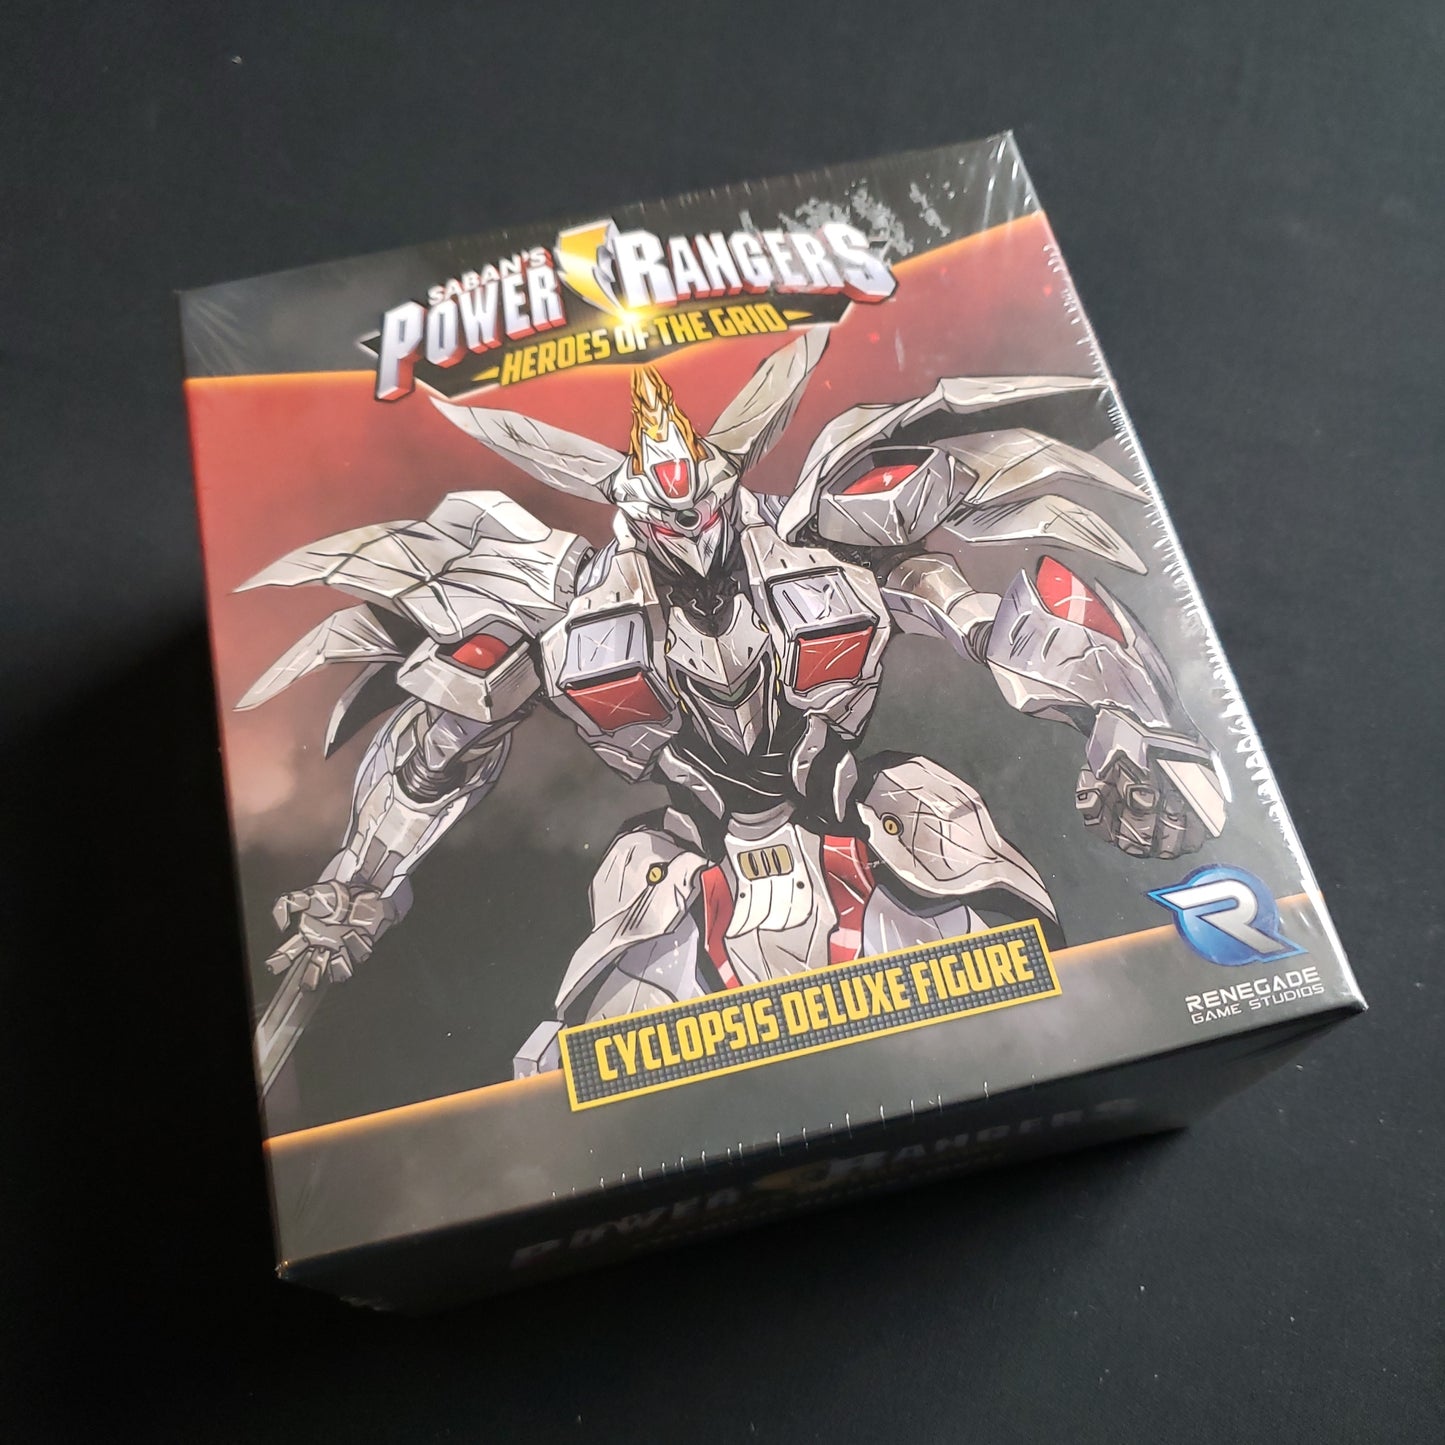 Image shows the front of the box for the Cyclopsis Deluxe Figure Expansion for the Power Rangers: Heroes of the Grid board game